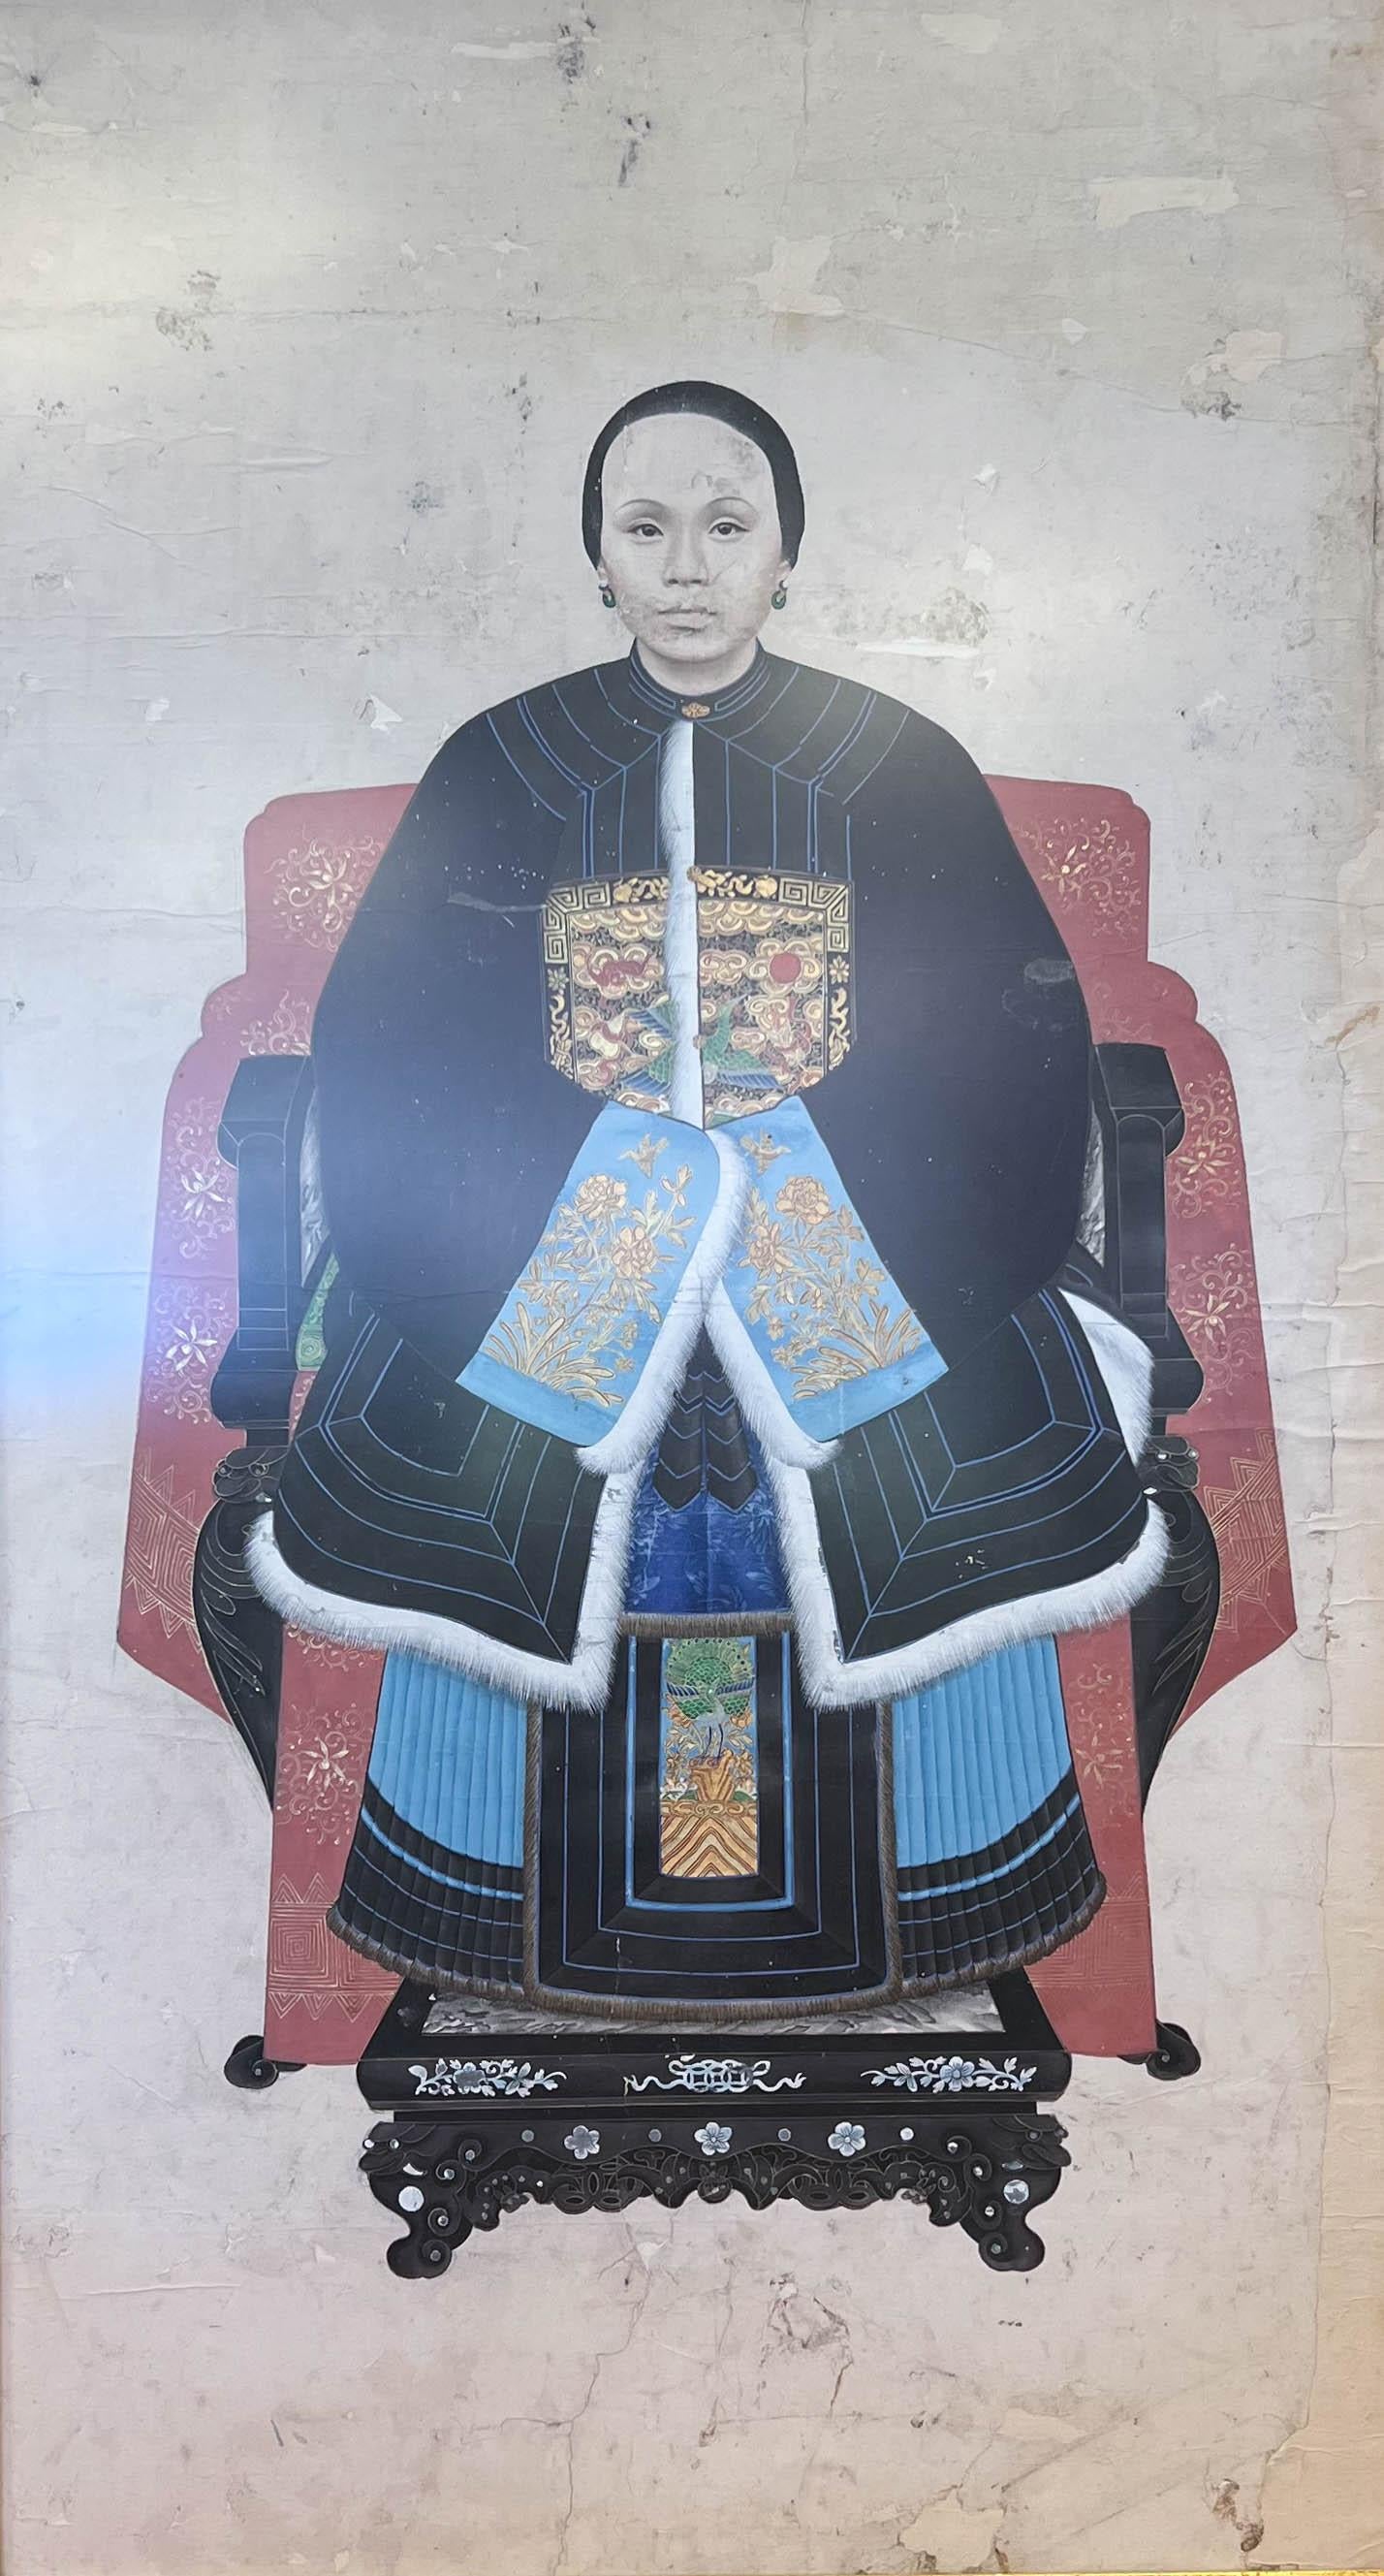 Ancestor Portrait of a noble Qing Dynasty woman. Her social status is reflected in the sable-trimmed overcoat fashioned in the strictly enforced dress coat of the Qing Dynasty.  The portrait is beautifully framed and matted with non-reflective